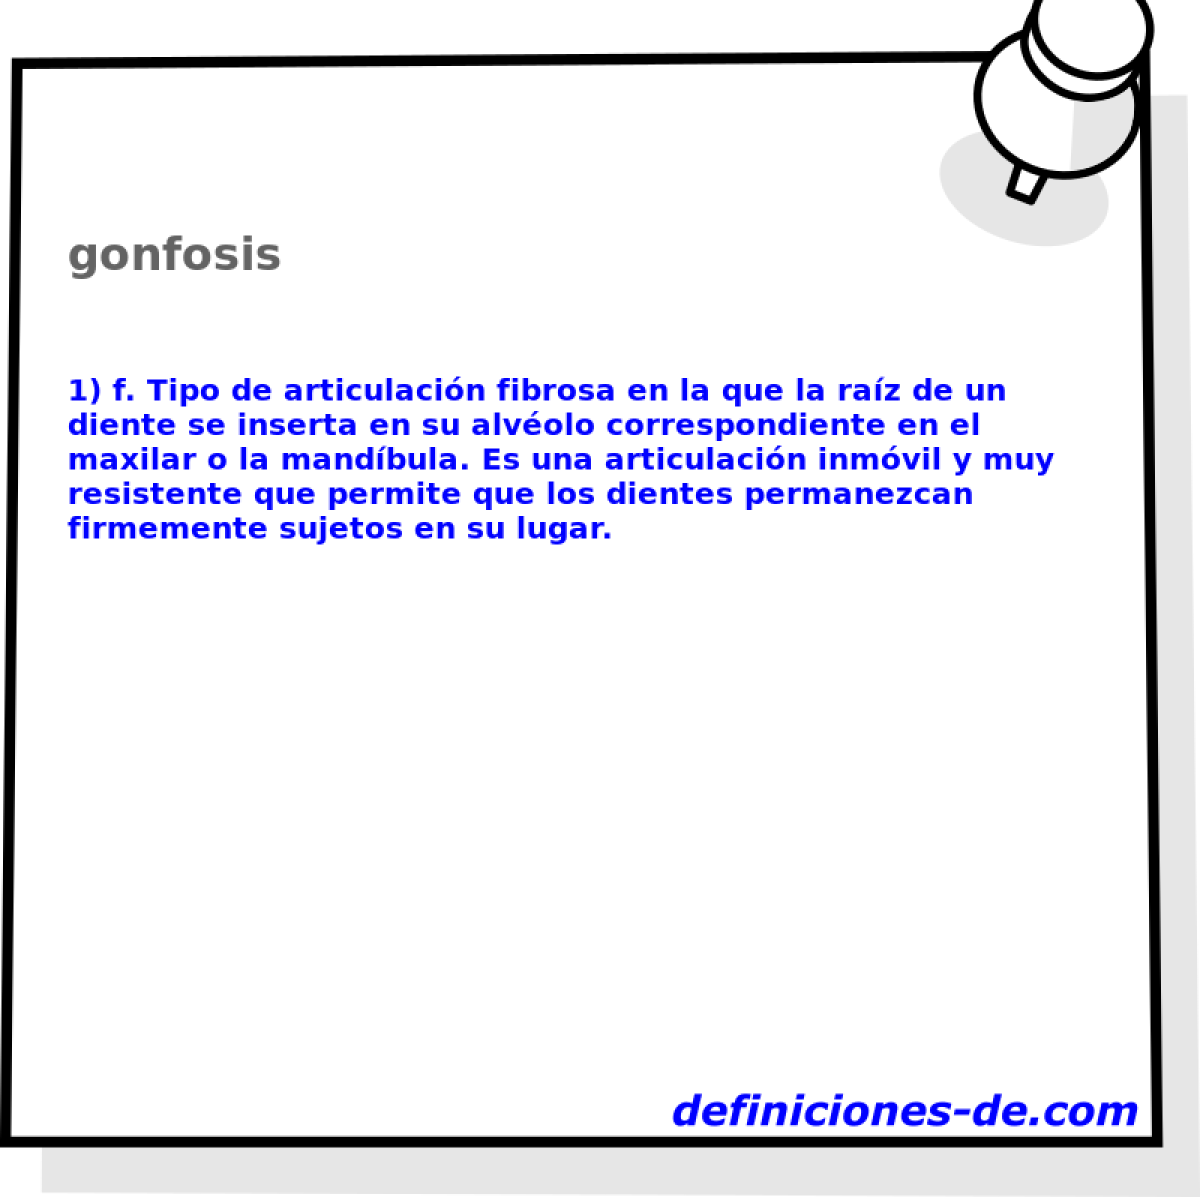 gonfosis 